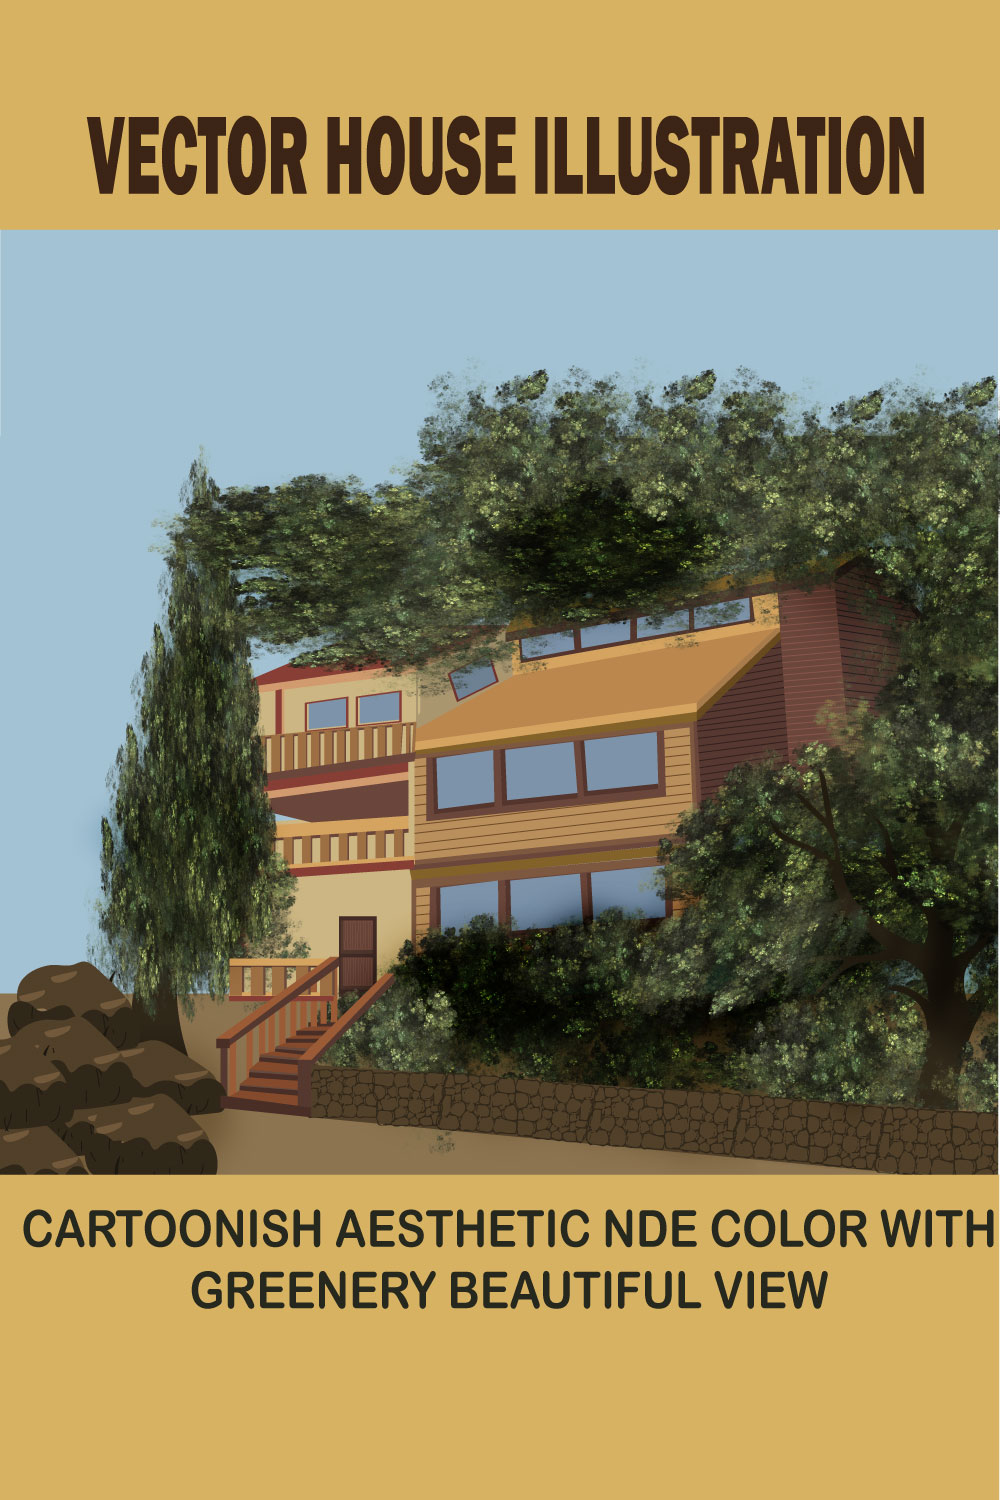 Aesthetic Colony Vector House with Beautiful Colors pinterest image.